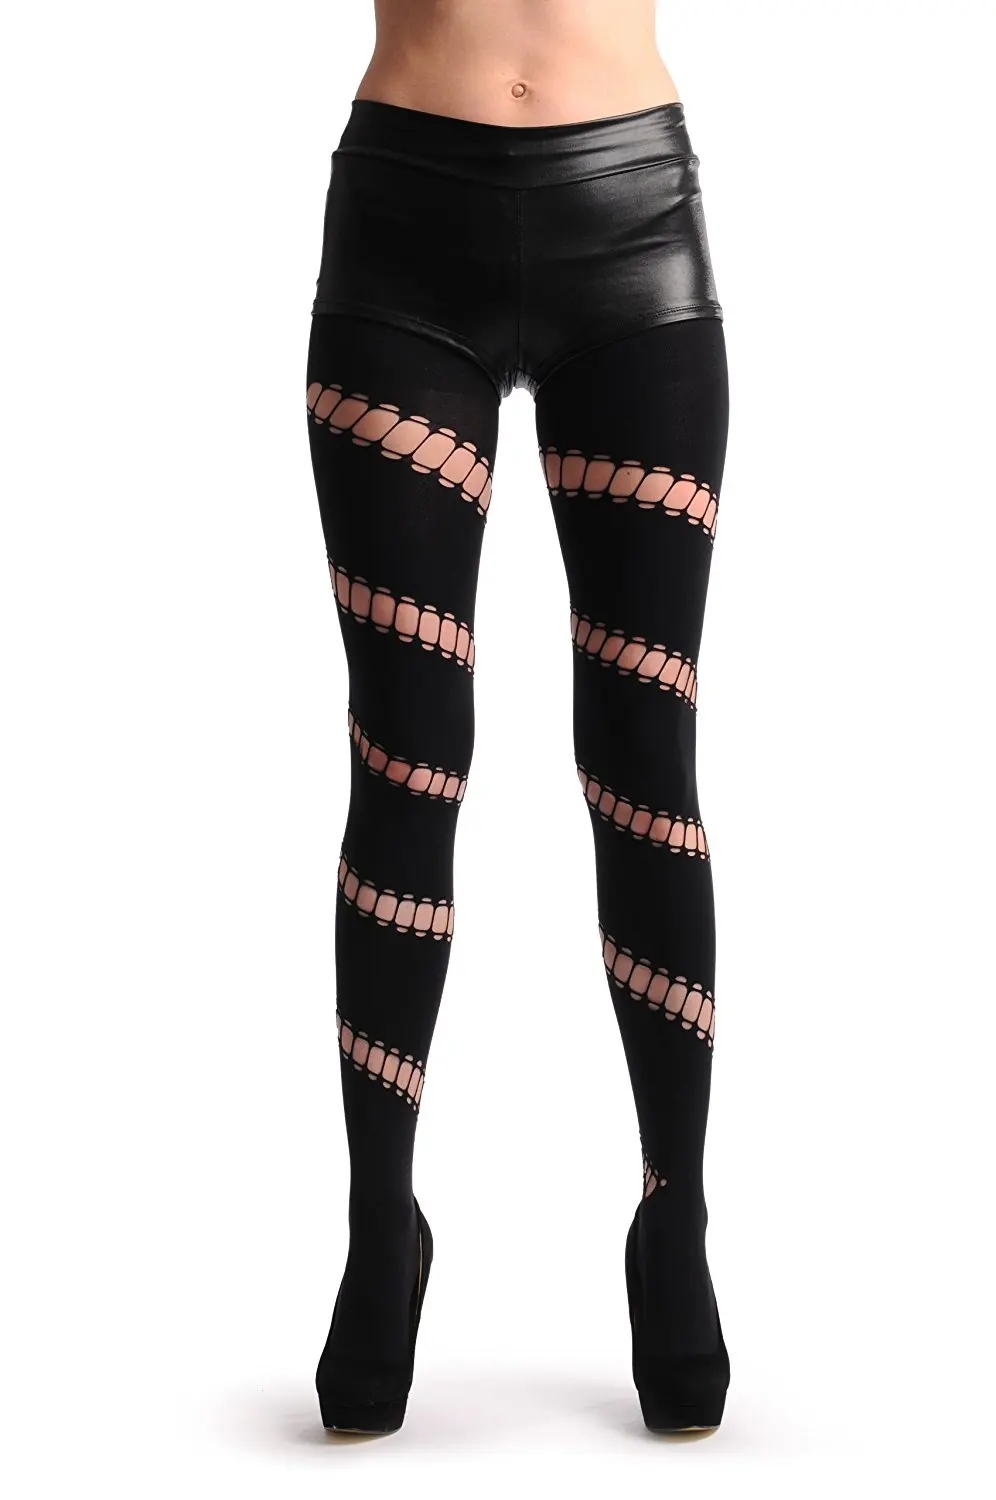 Cheap Ripped Black Tights, find Ripped Black Tights deals on line at ...